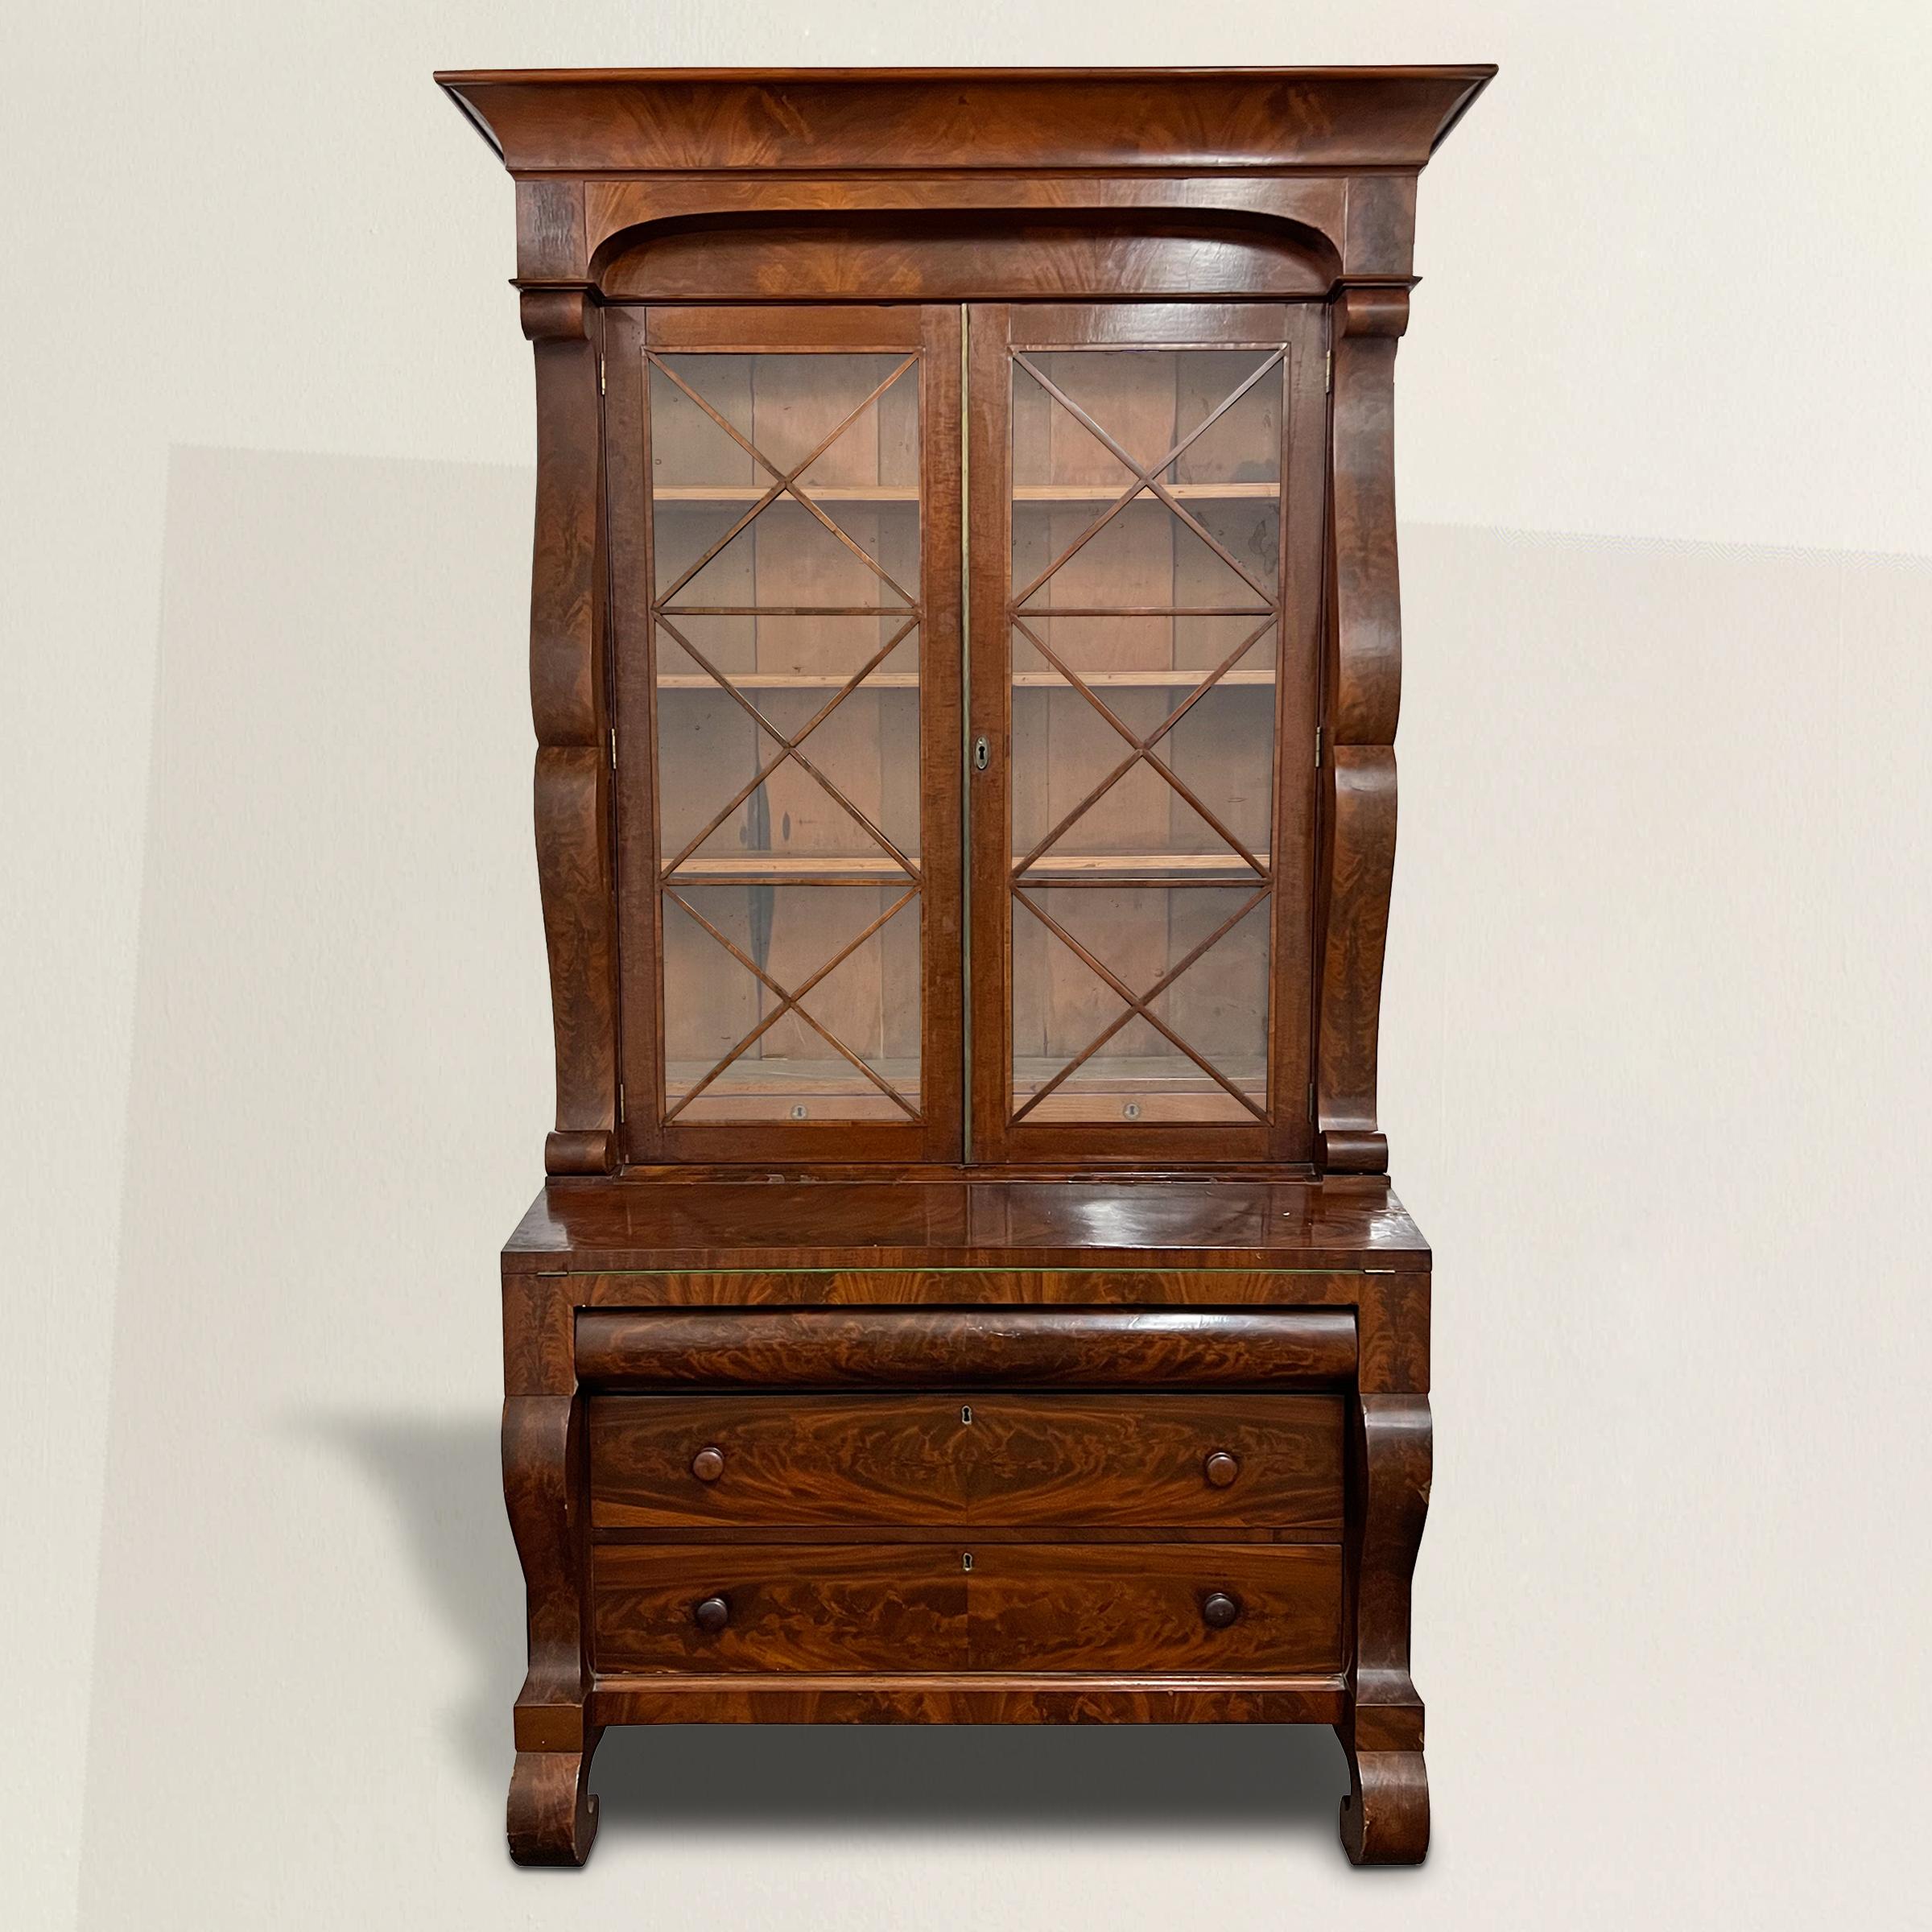 A remarkable, and strong early 19th century American Empire secretary bookcase of grand architectural scale with an incredible arched pediment over a bookcase with two doors retaining their original wavy glazing, three adjustable interior shelves